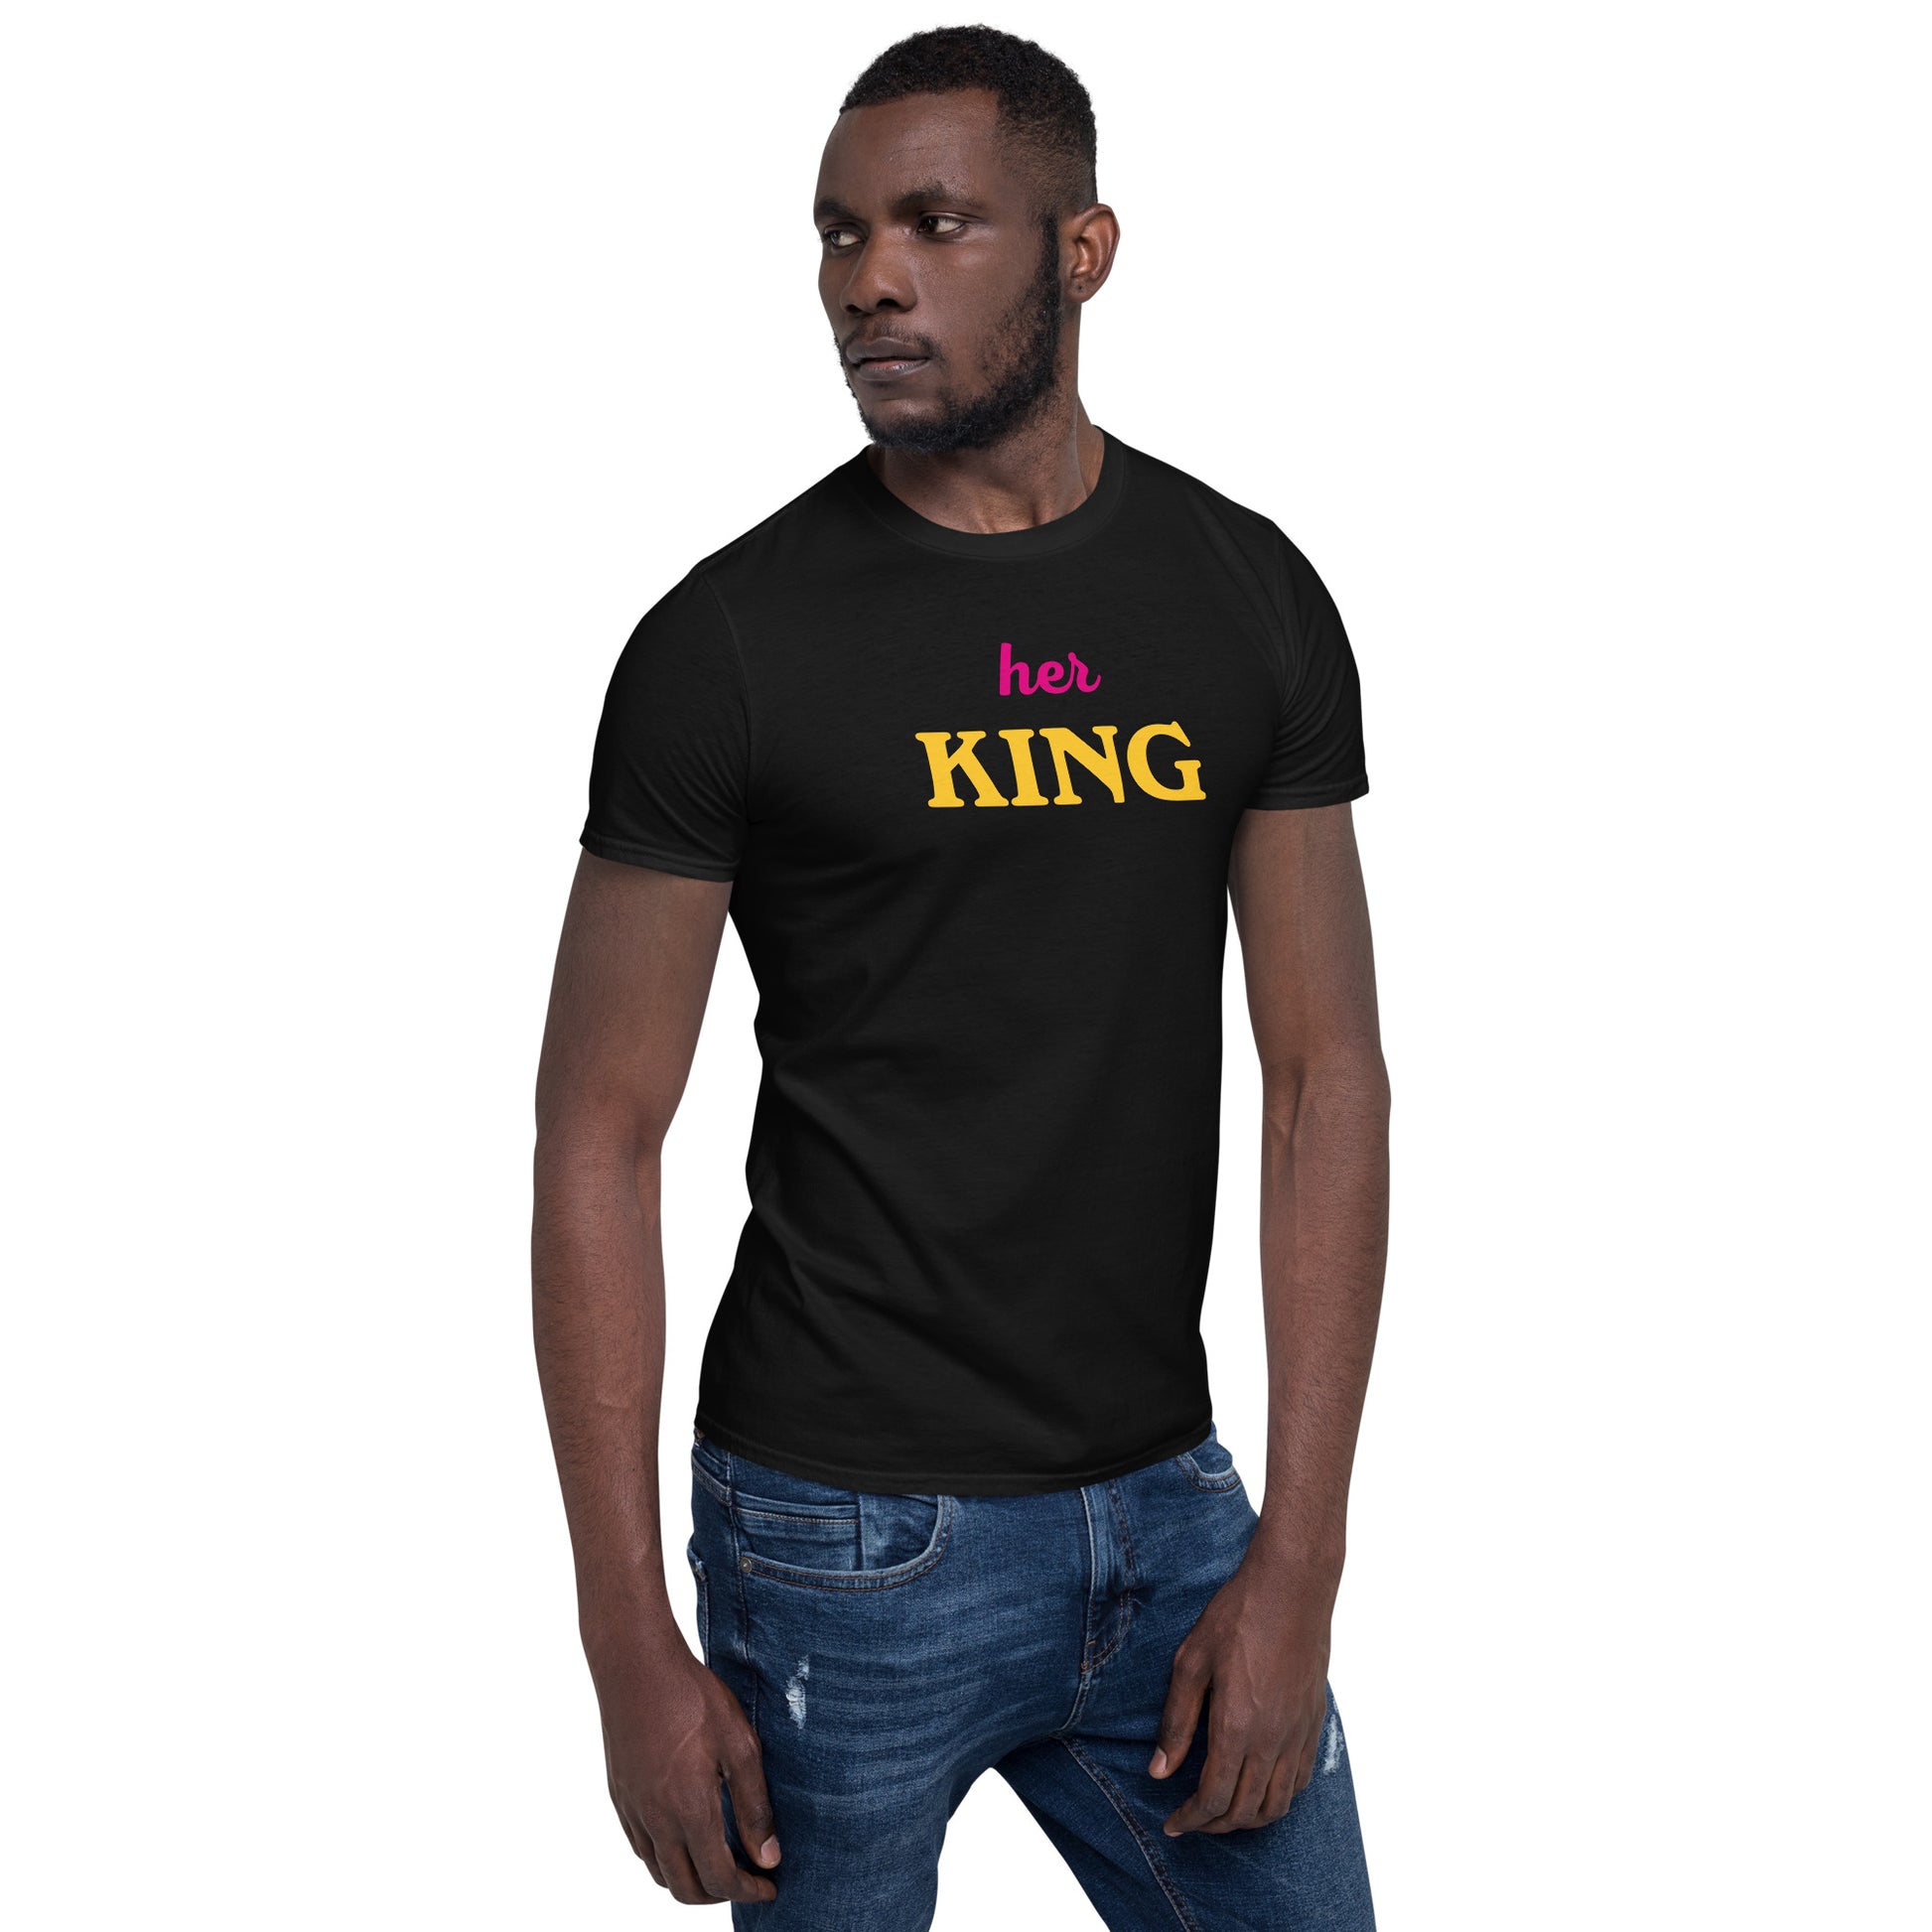 Her King Softstyle T-Shirt left